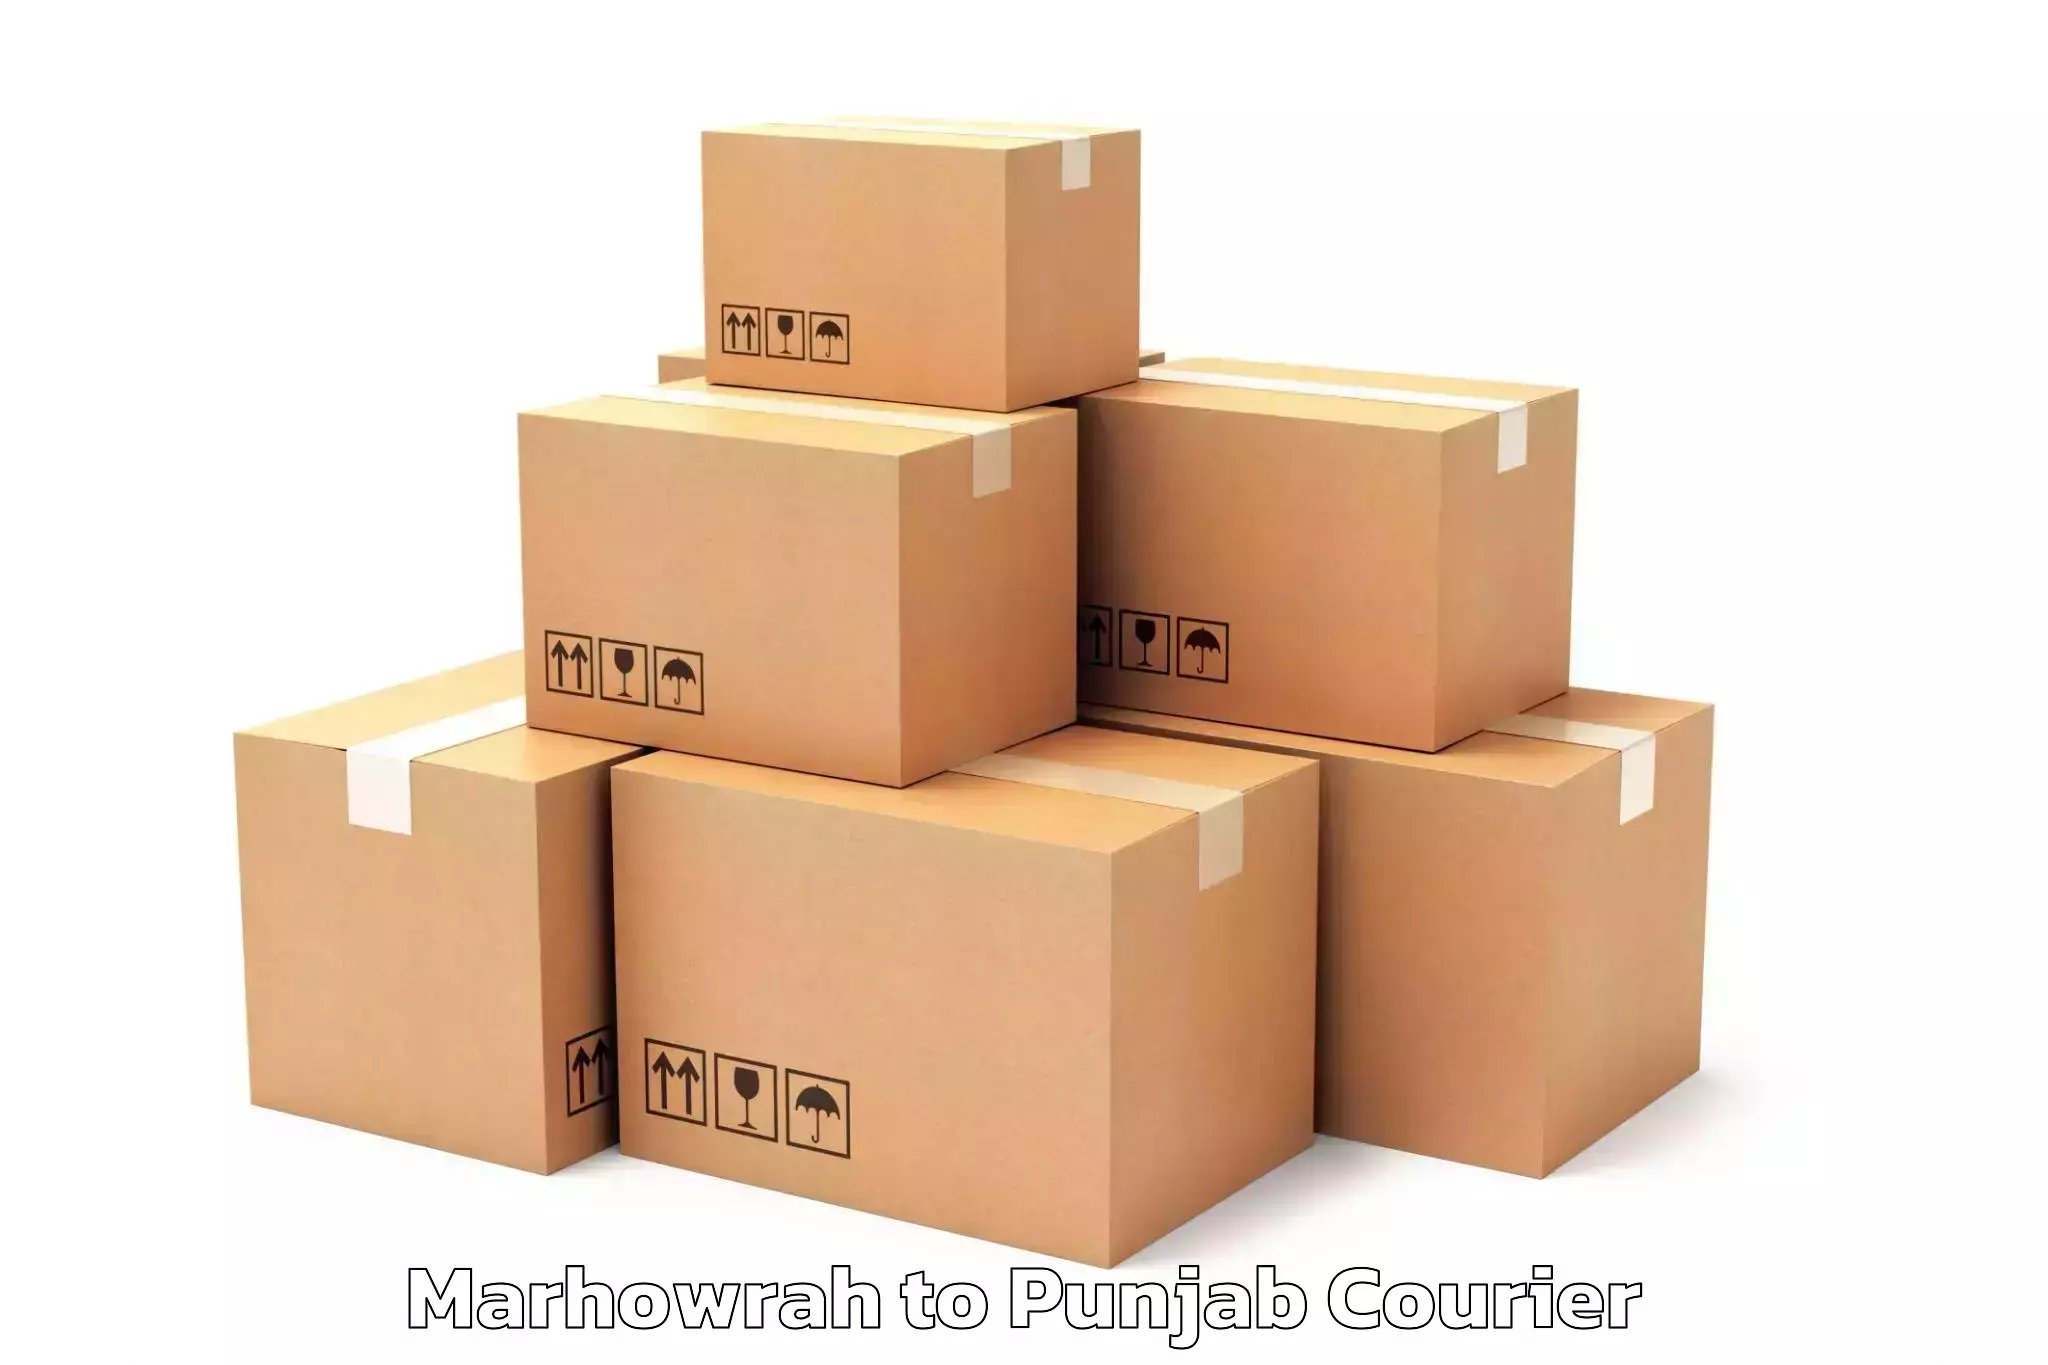 Efficient moving and packing Marhowrah to Amritsar